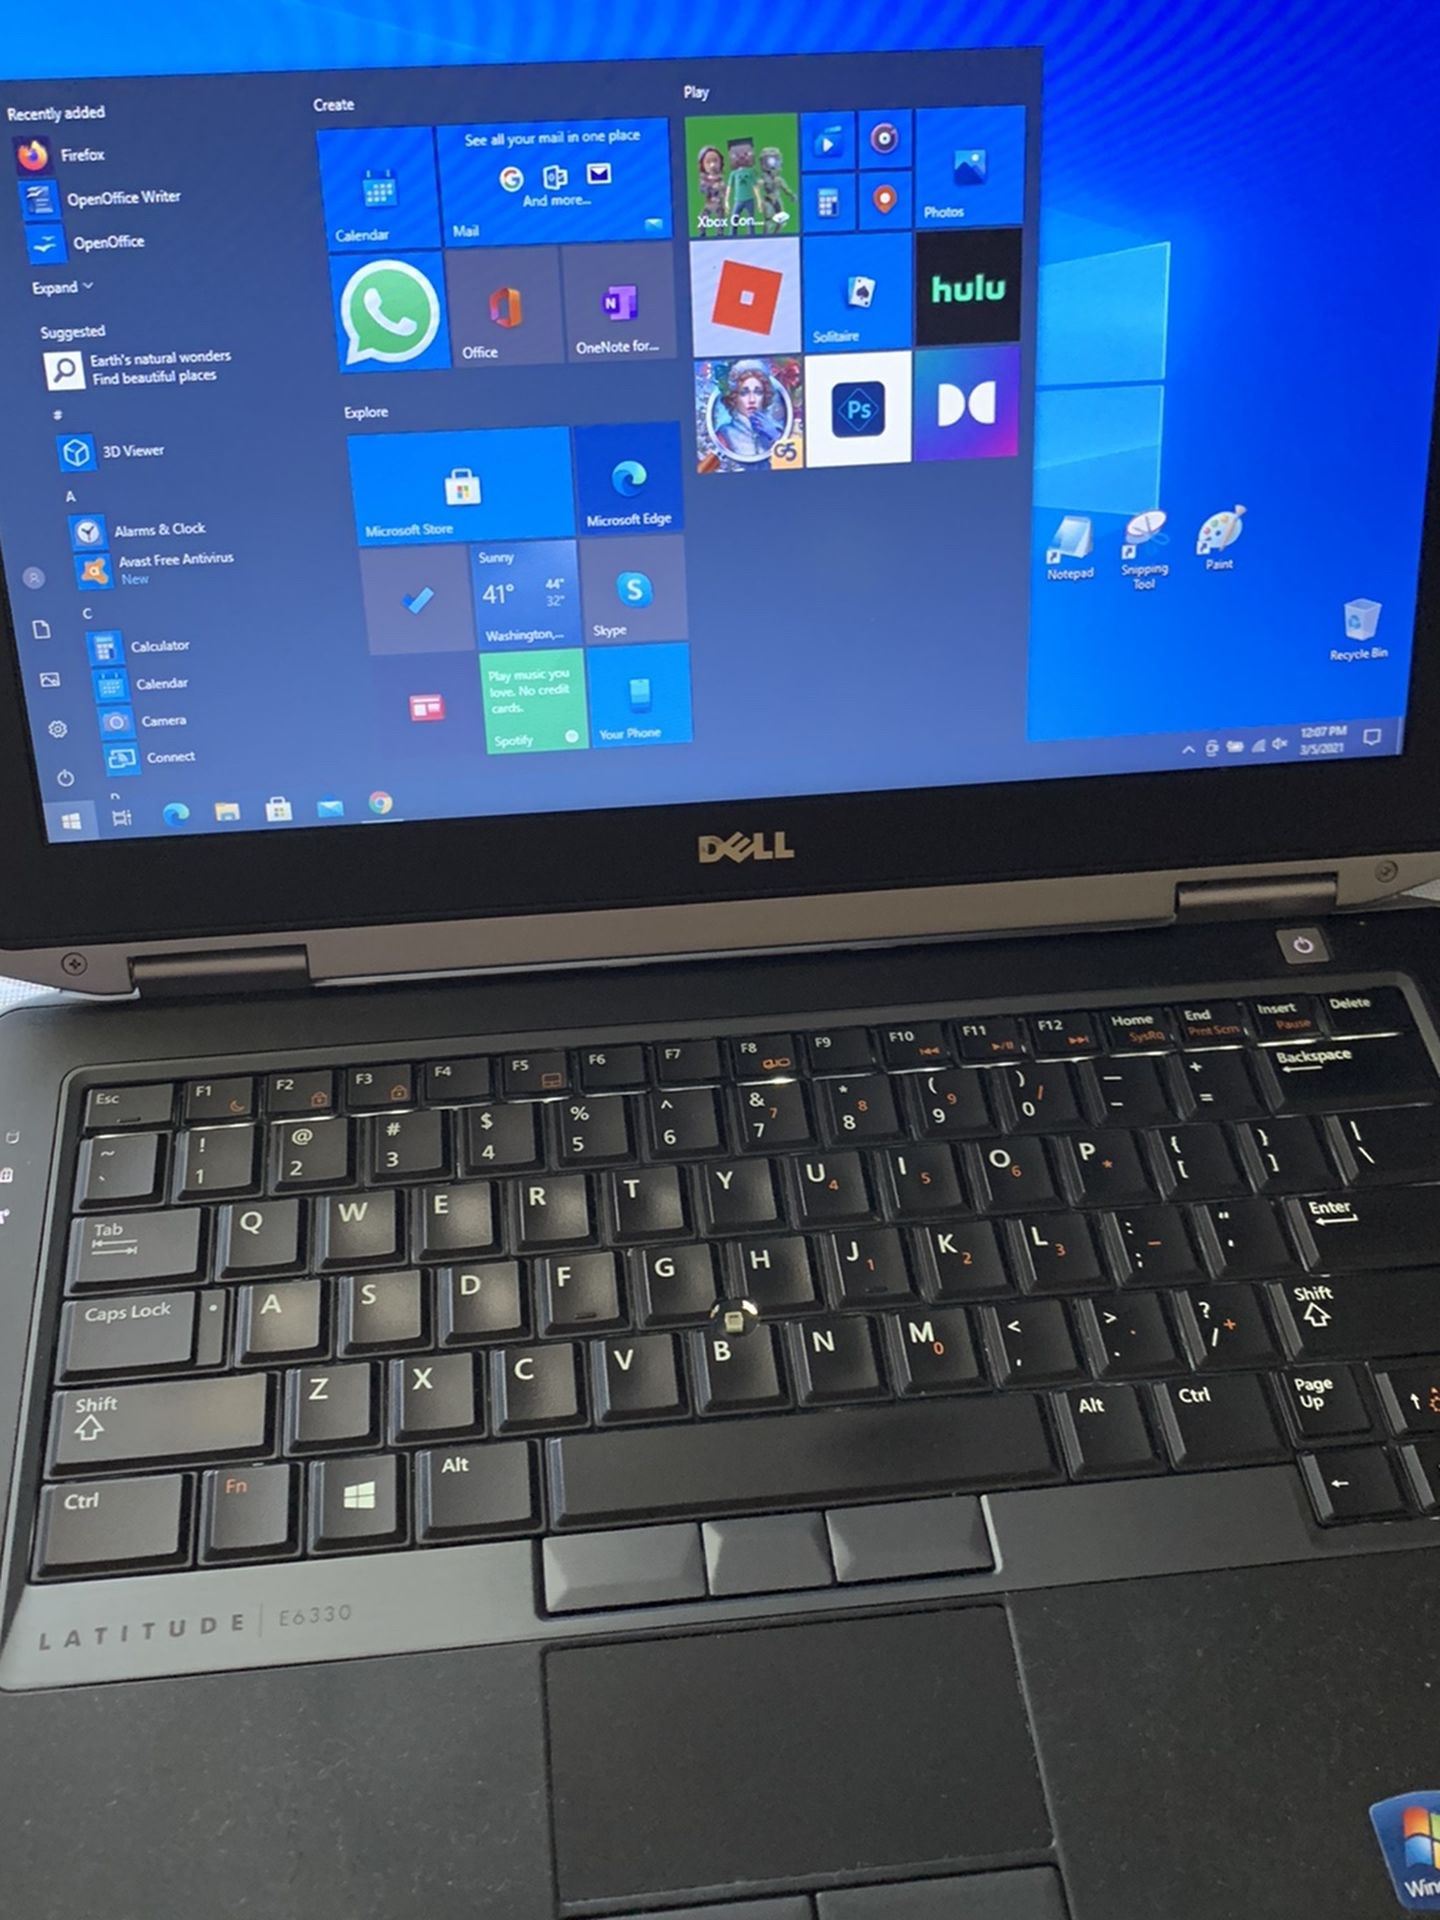 CHEAP WORK SCHOOL Windows 10 LAPTOP // 14" Dell Lattitude - 8GB RAM - 500GB HDD - Charger included - Intel i5-3380M CPU 2.90Ghz - Intel HD Graphics 40